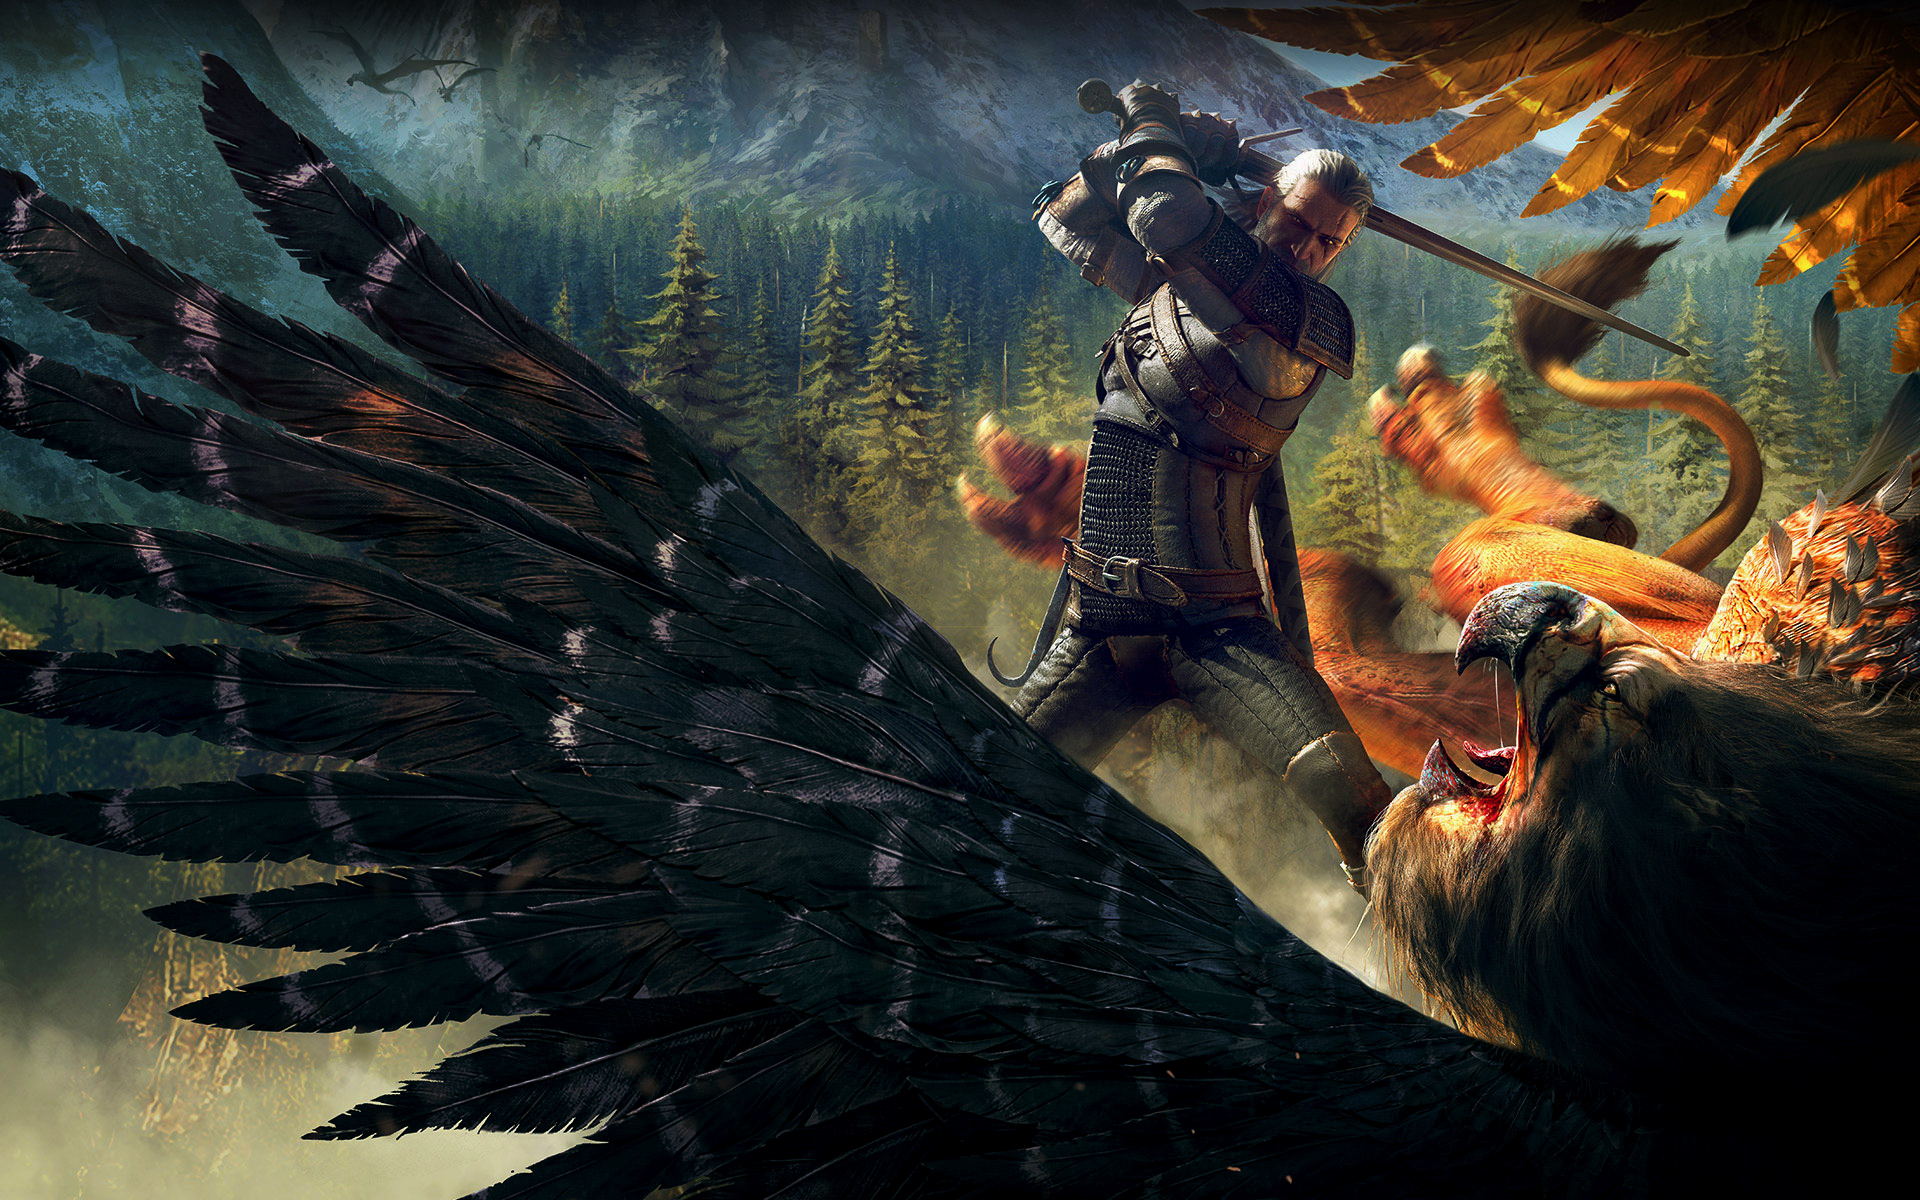 The Witcher The Witcher 3 Wild Hunt Geralt Of Rivia Griffin Griffins 1920x1200